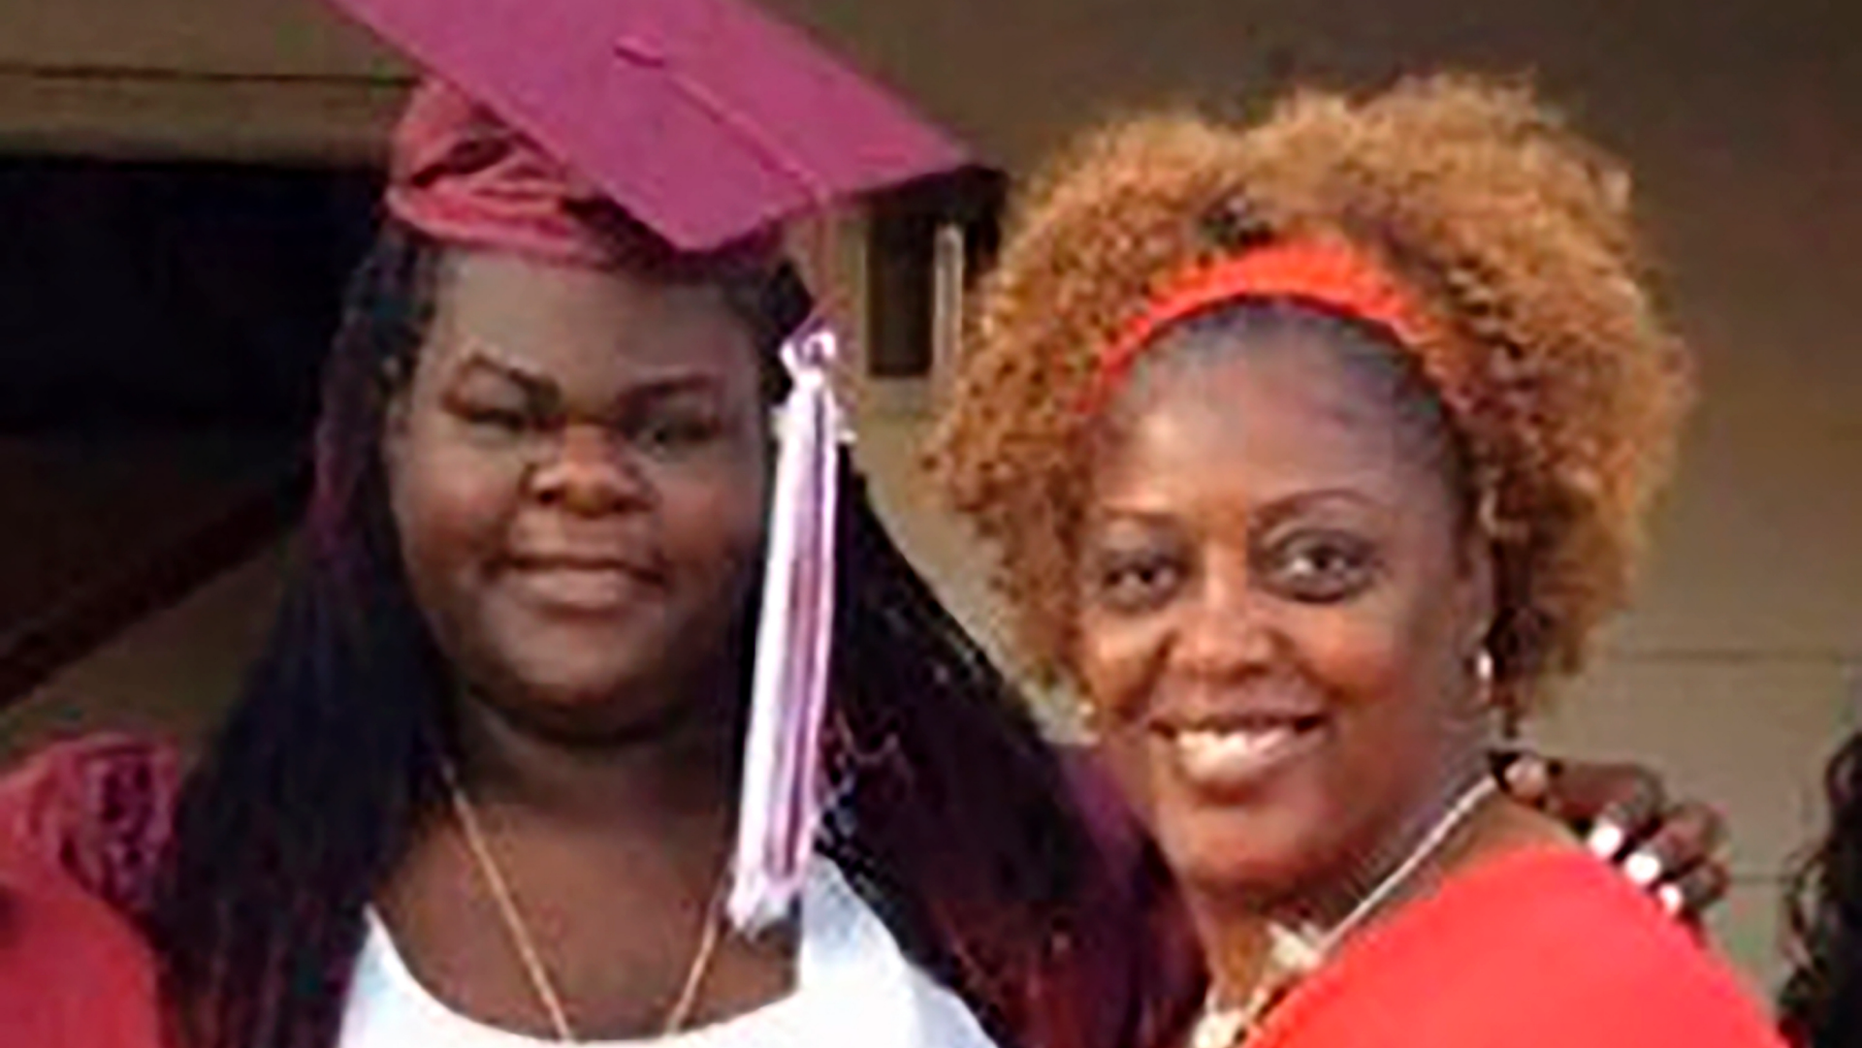 This undated photo provided by the Turner family shows Pamela Turner, right, with her daughter Chelsie Rubin in Baytown, Texas. A police officer in the Houston area knew that his neighbor was suffering from mental illness and should have offered help as soon as it was apparent. However, he shot dead the 44-year-old woman, a lawyer for the victim's family said Thursday, May 16, 2019. A spokesman for the police did not immediately answer questions Thursday, but has already indicated that the agent had tried to stop Turner because he knew that there were pending warrants against him. (Courtesy of the Turner family via AP)